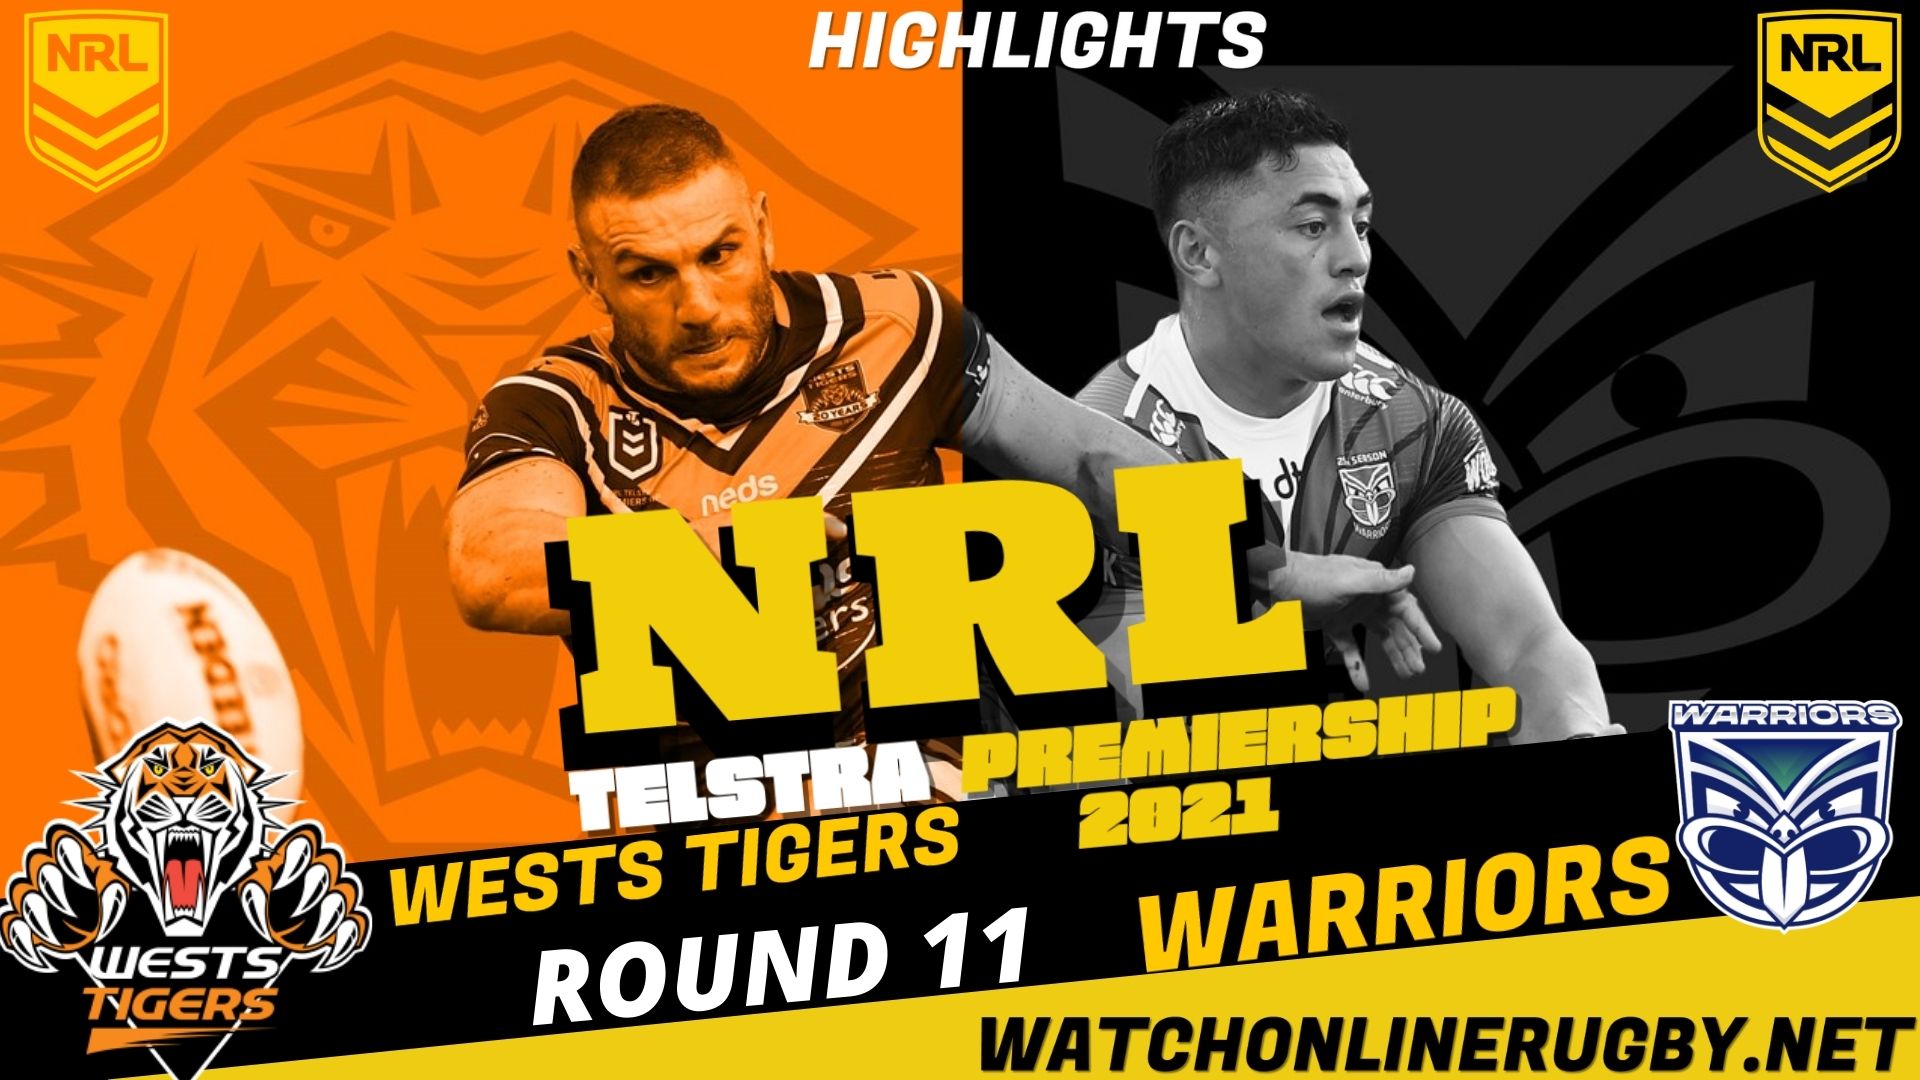 Warriors Vs Wests Tigers Highlights RD 11 NRL Rugby